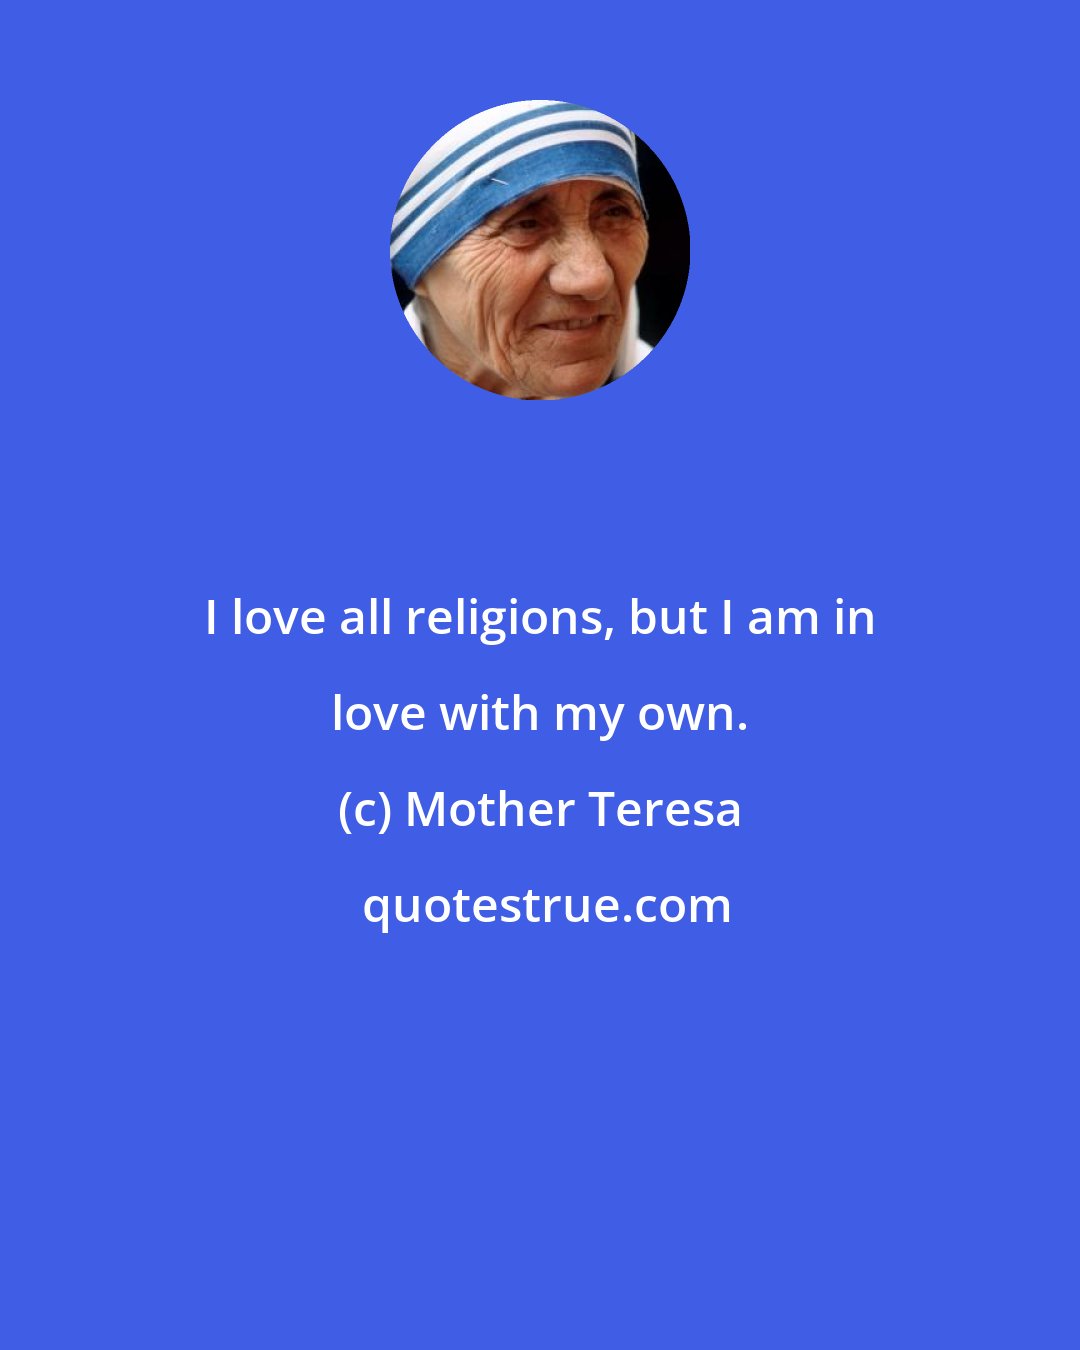 Mother Teresa: I love all religions, but I am in love with my own.